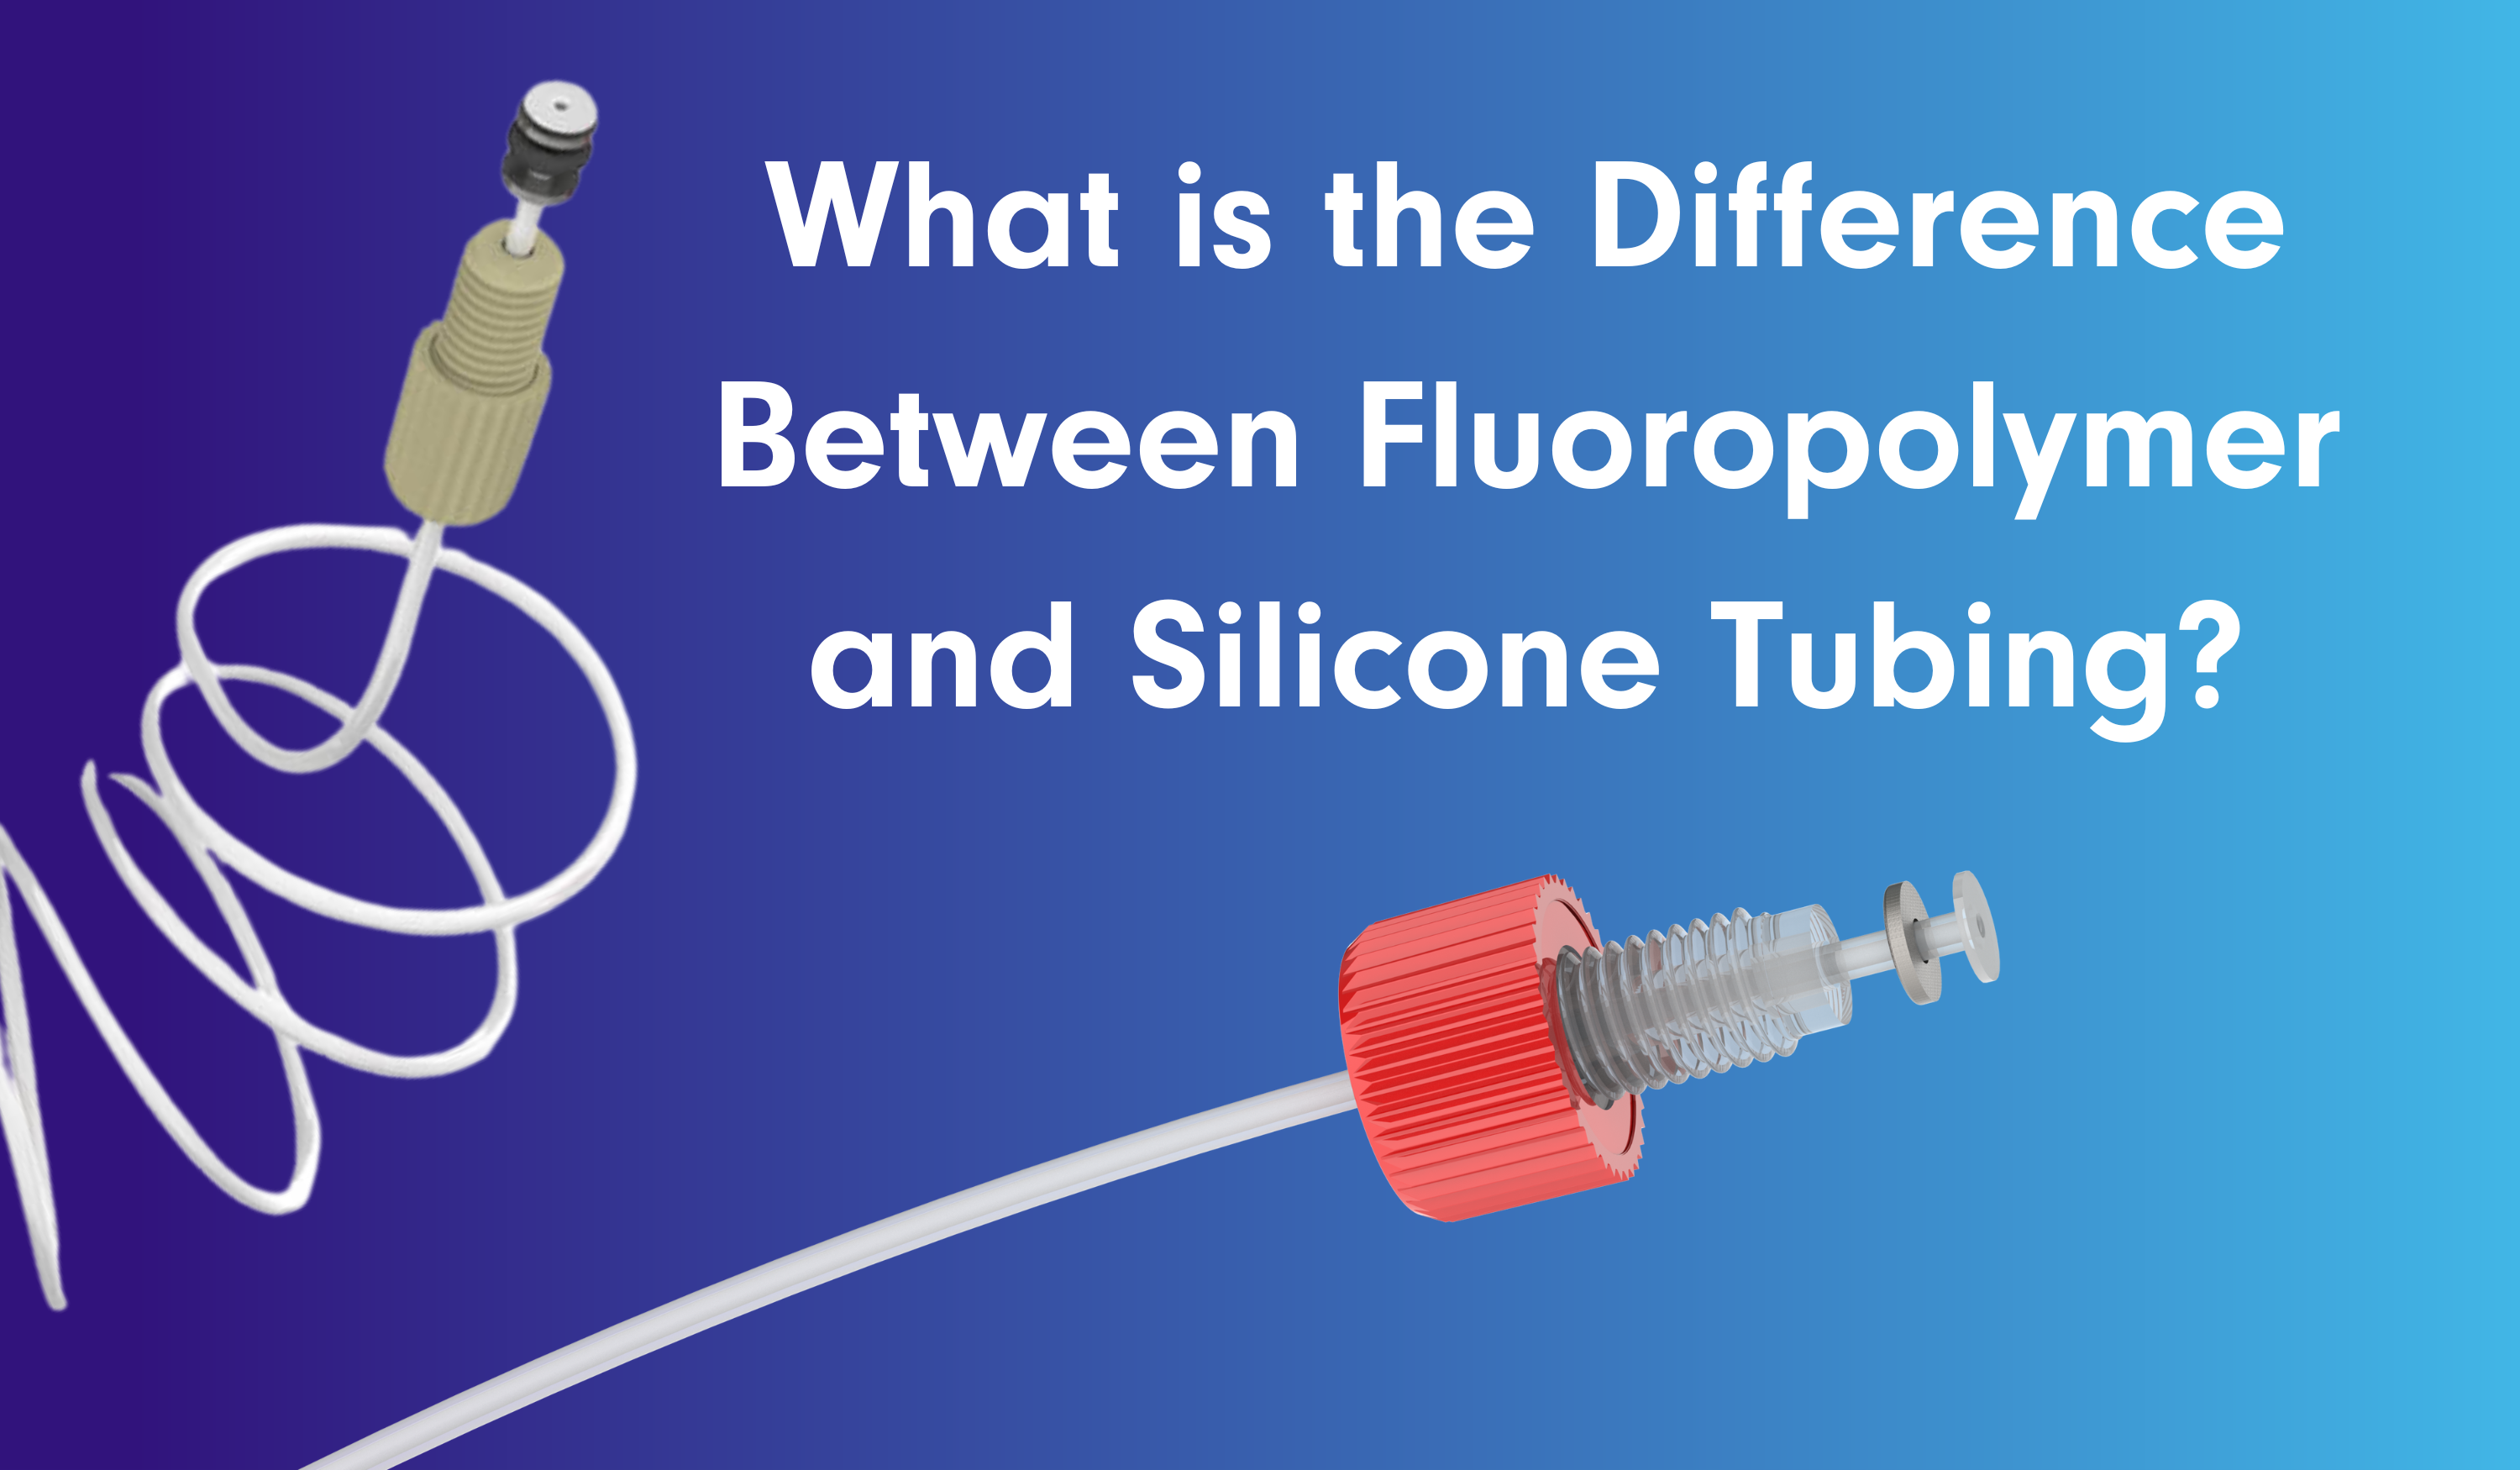 What is the Difference Between Fluoropolymer and Silicone Tubing?